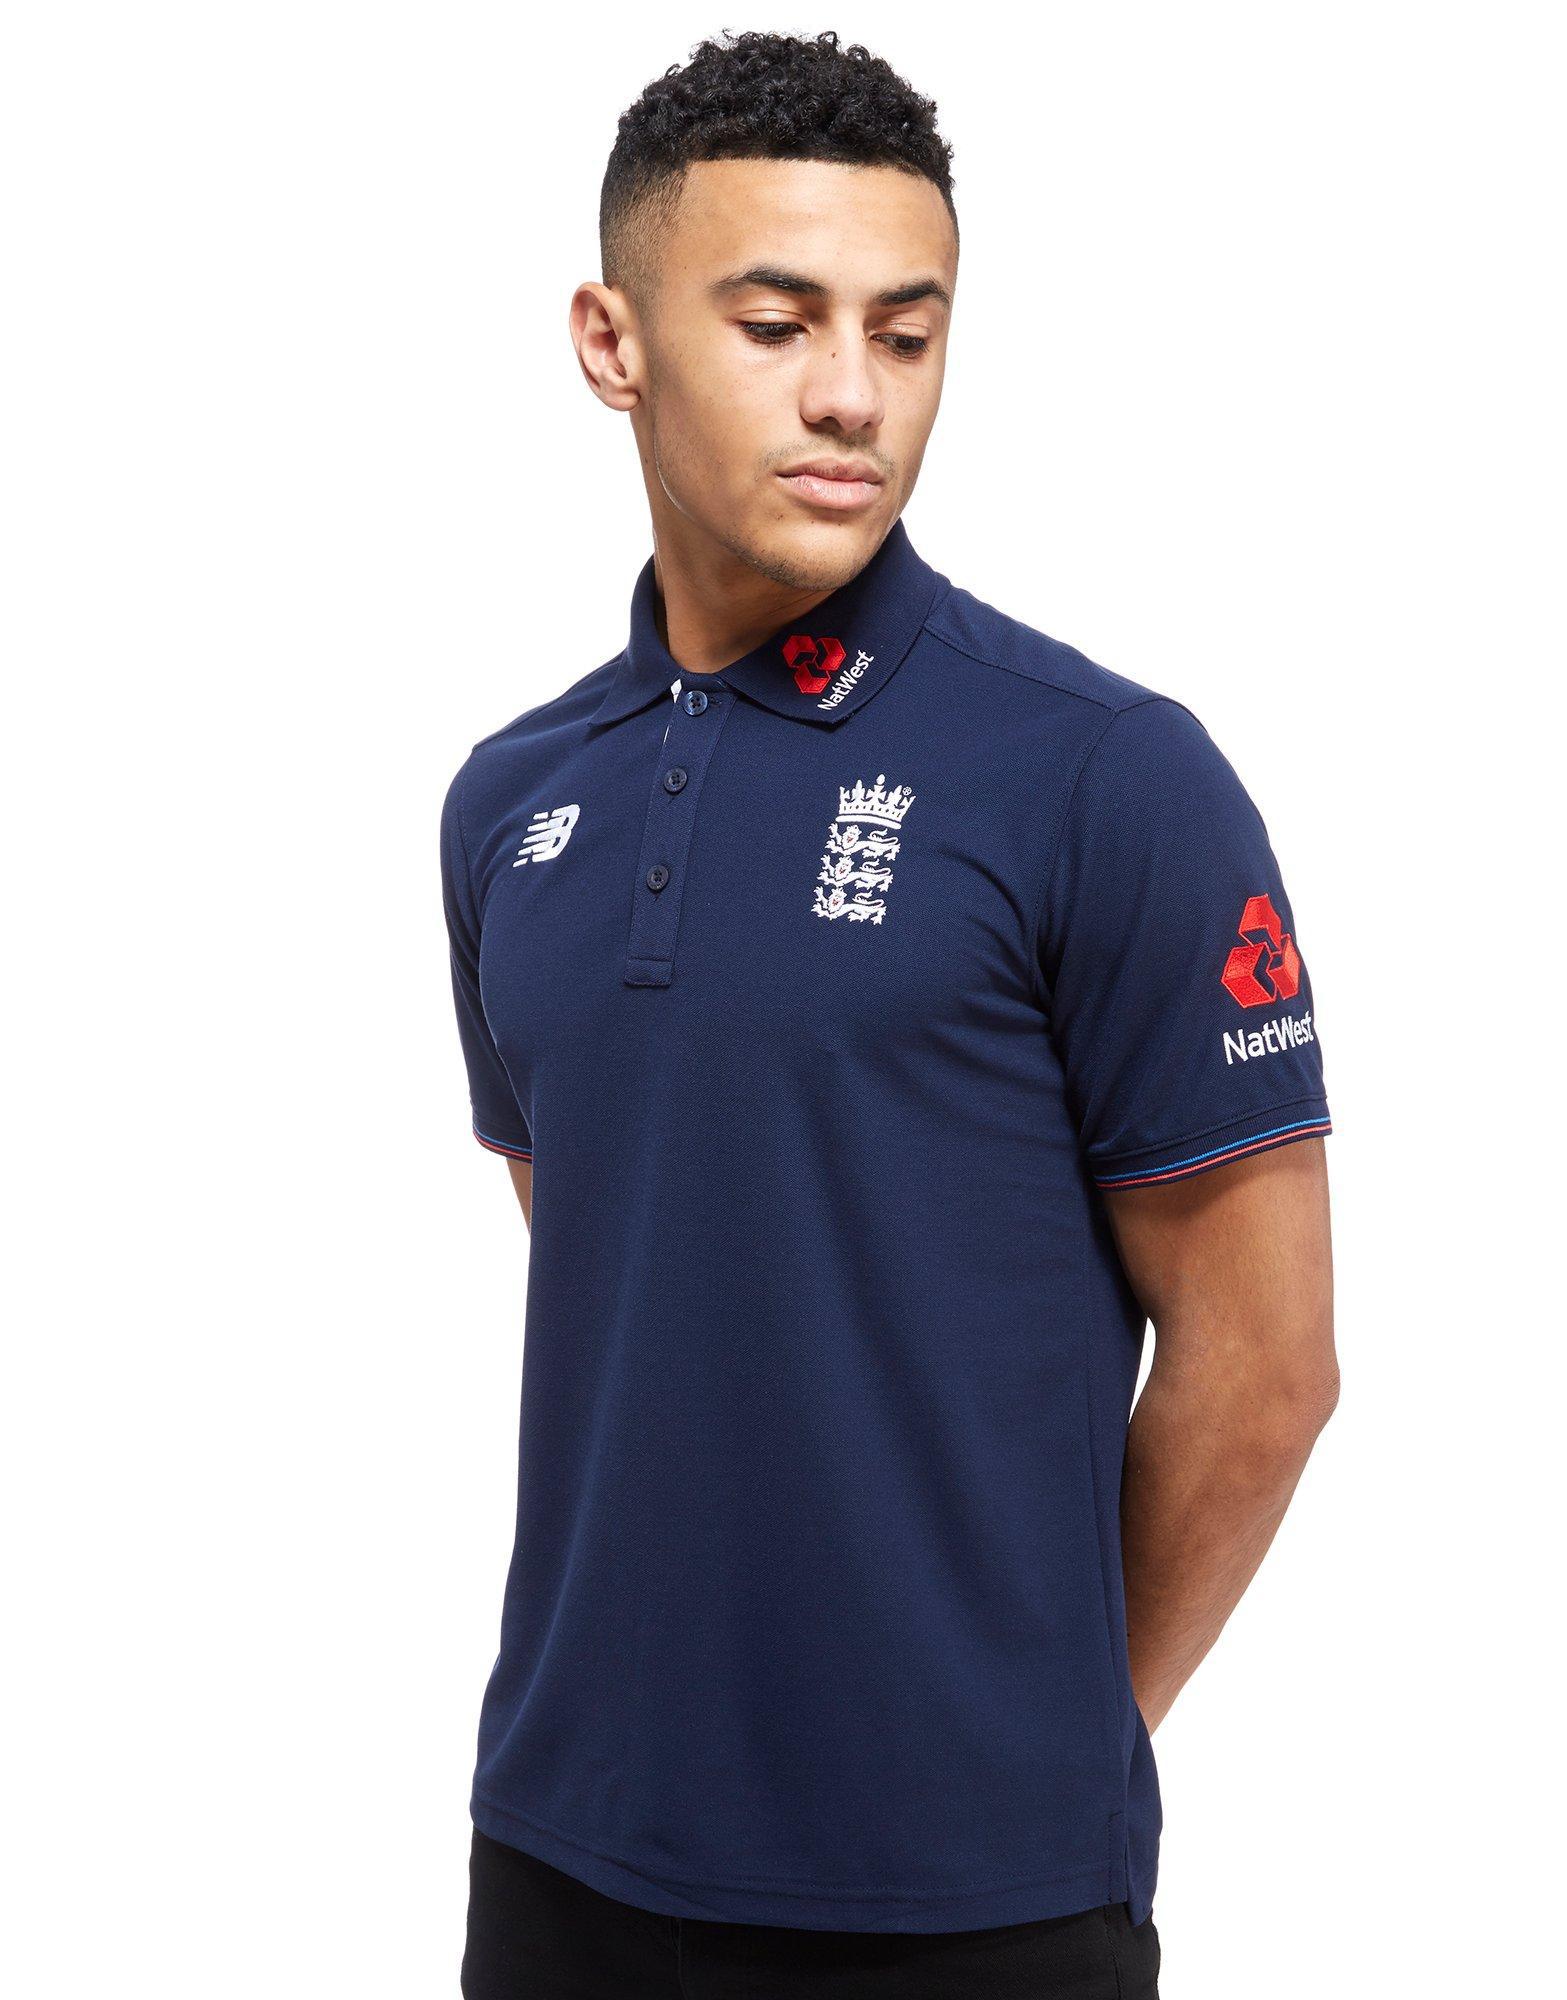 Lyst - New Balance Ecb Polo Shirt in Blue for Men